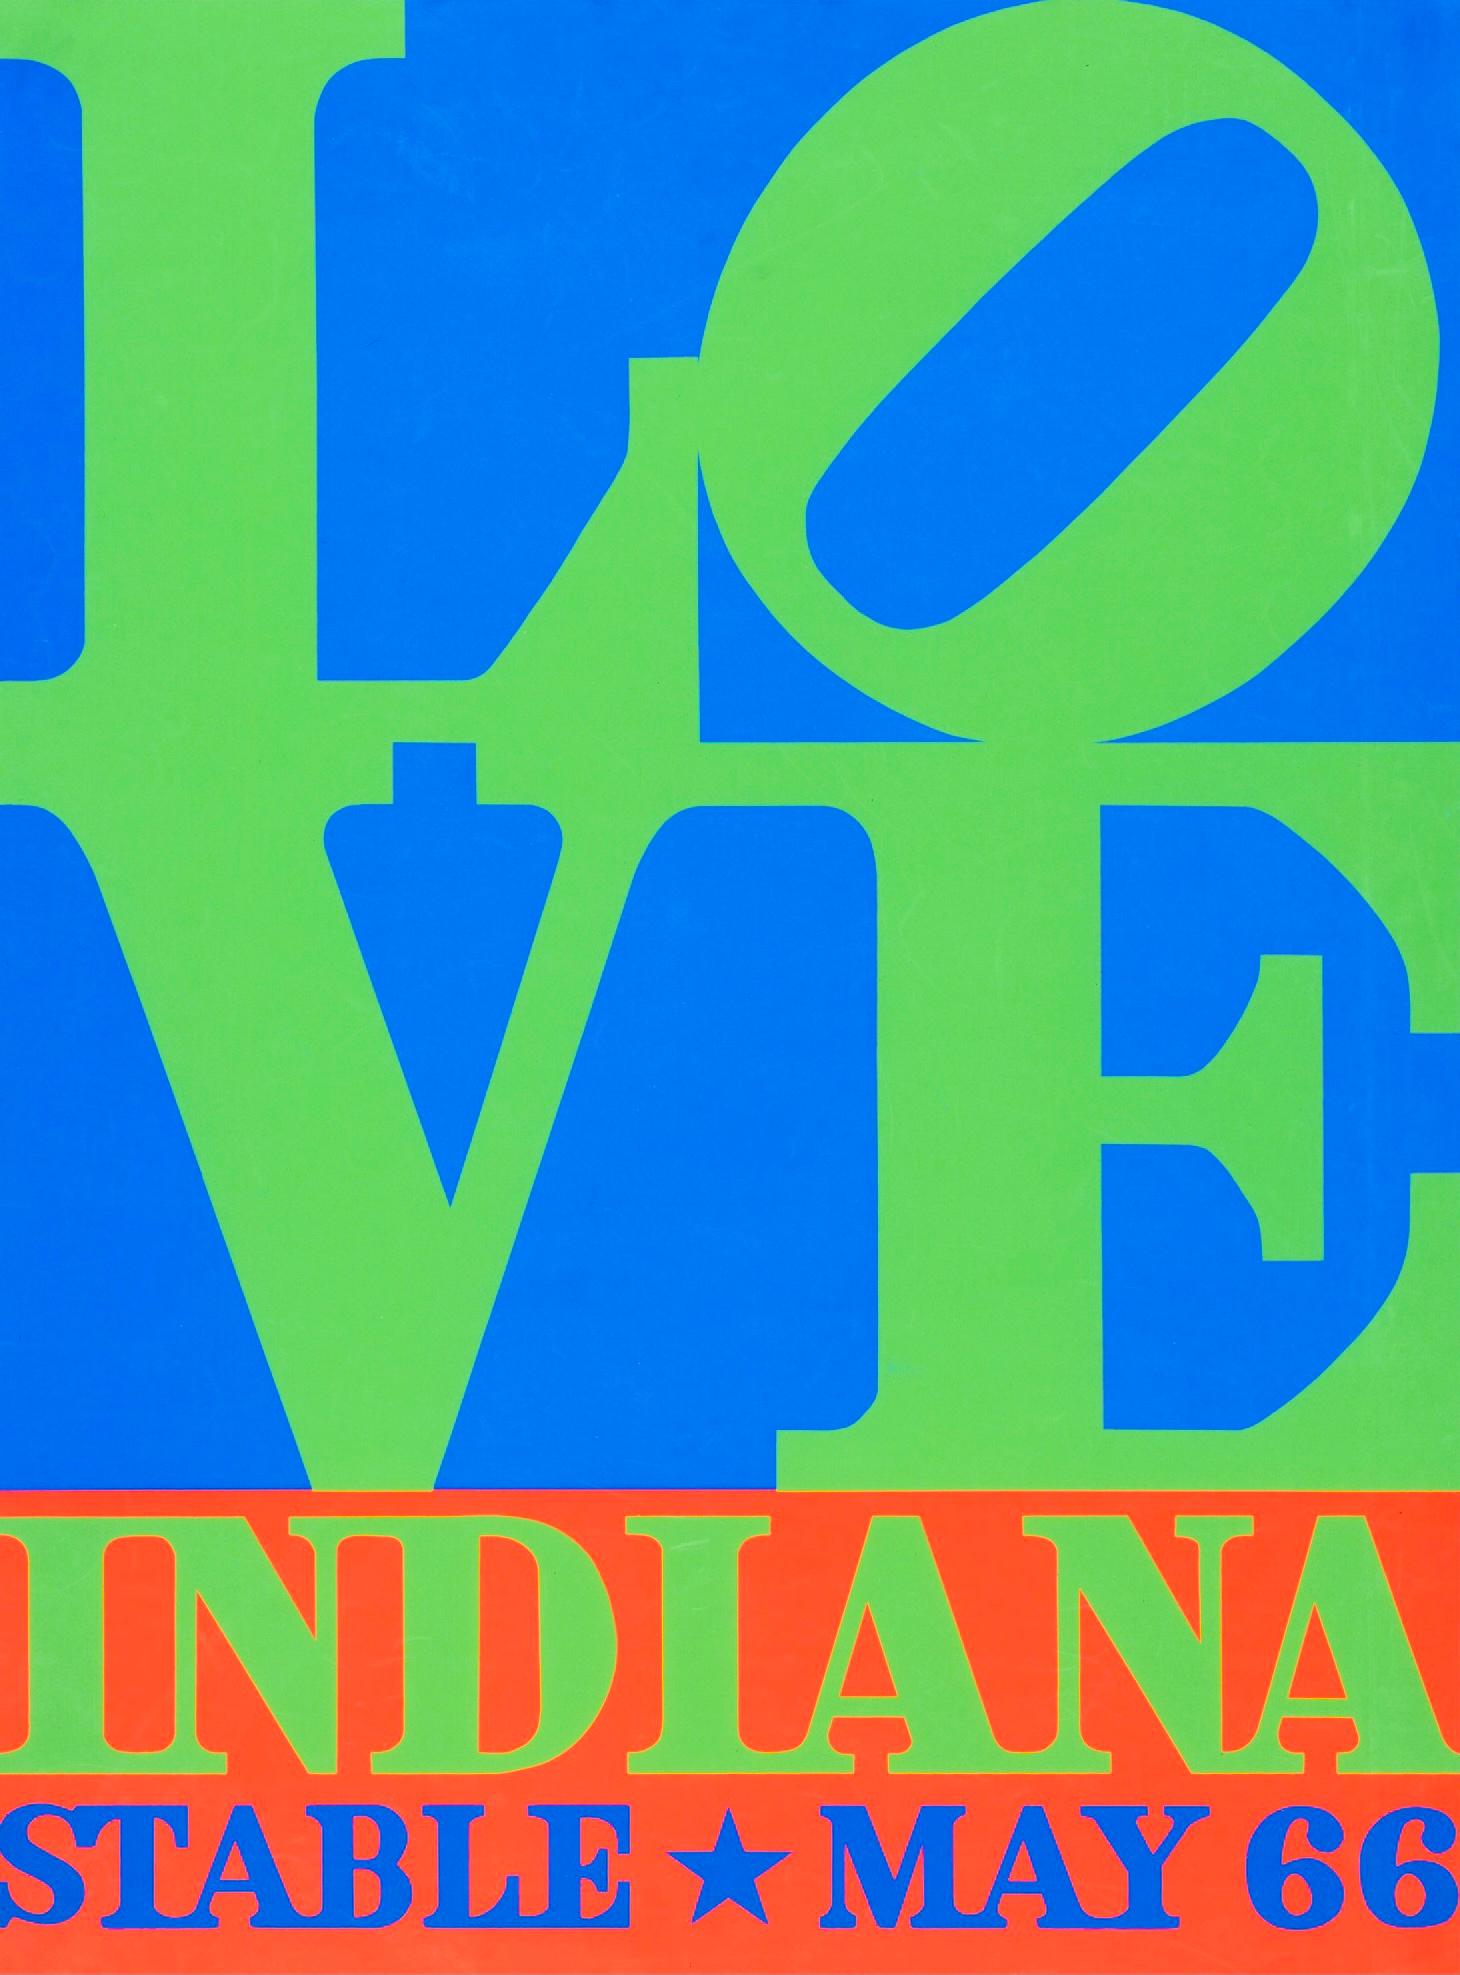 Robert Indiana Landscape Print - LOVE, [Robert] Indiana, Stable [Gallery], May [19]66